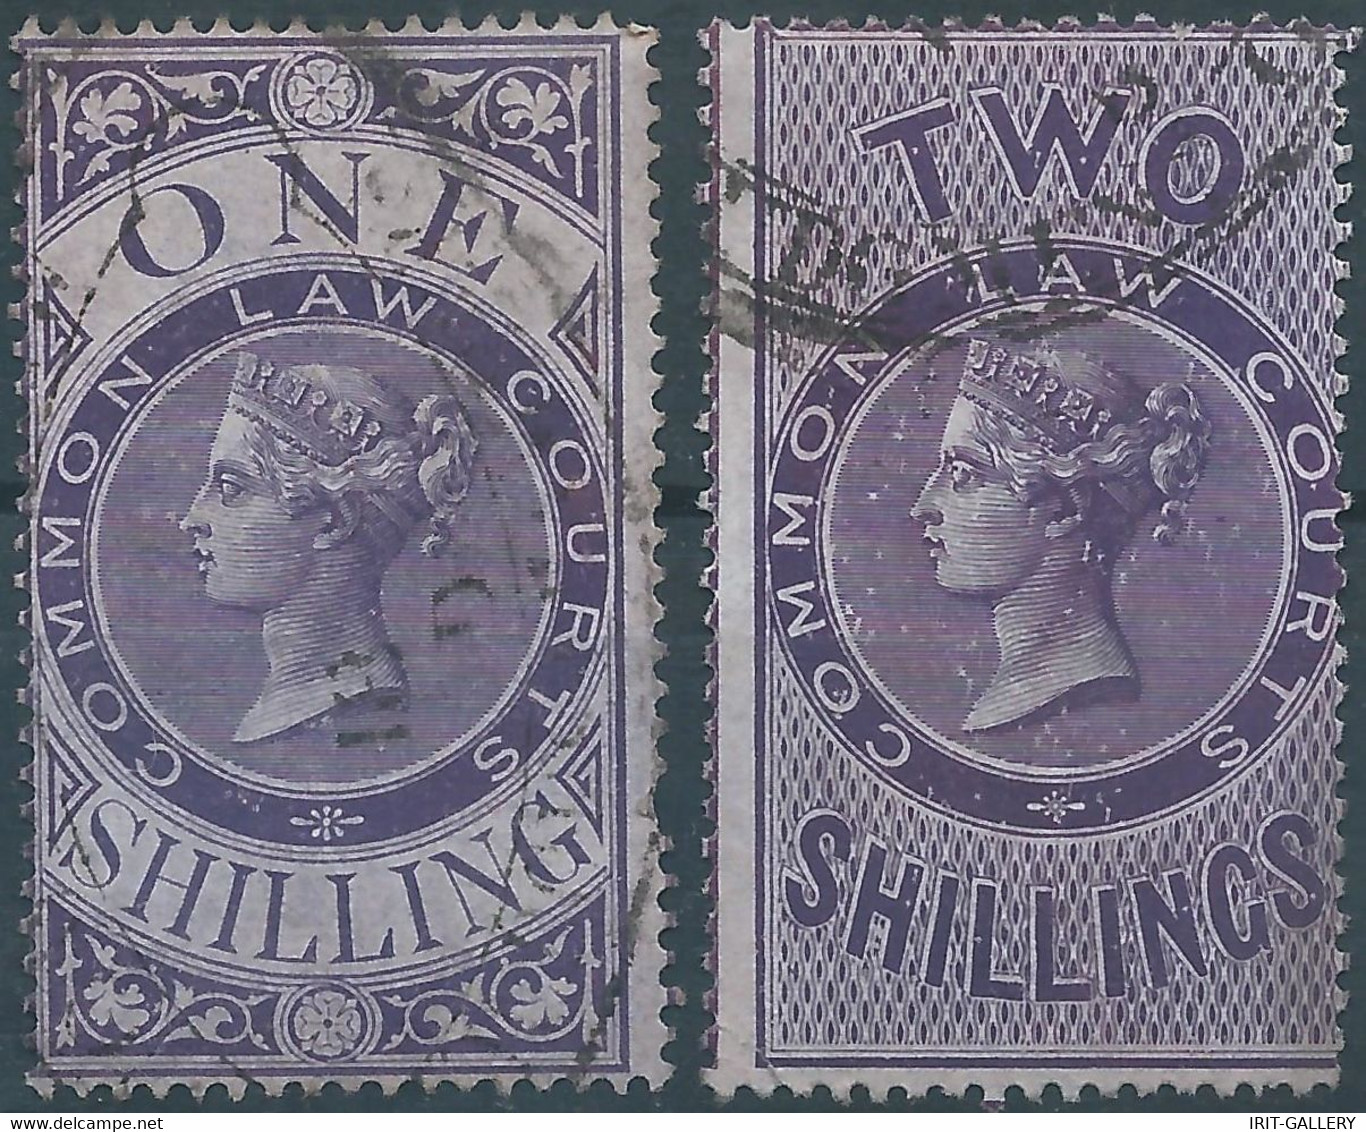 Great Britain-ENGLAND,Queen Victoria,1870/1880 Revenue Stamps Tax Fiscal COMMON LAW COURTS,1 & 2 Shillings,Used - Revenue Stamps